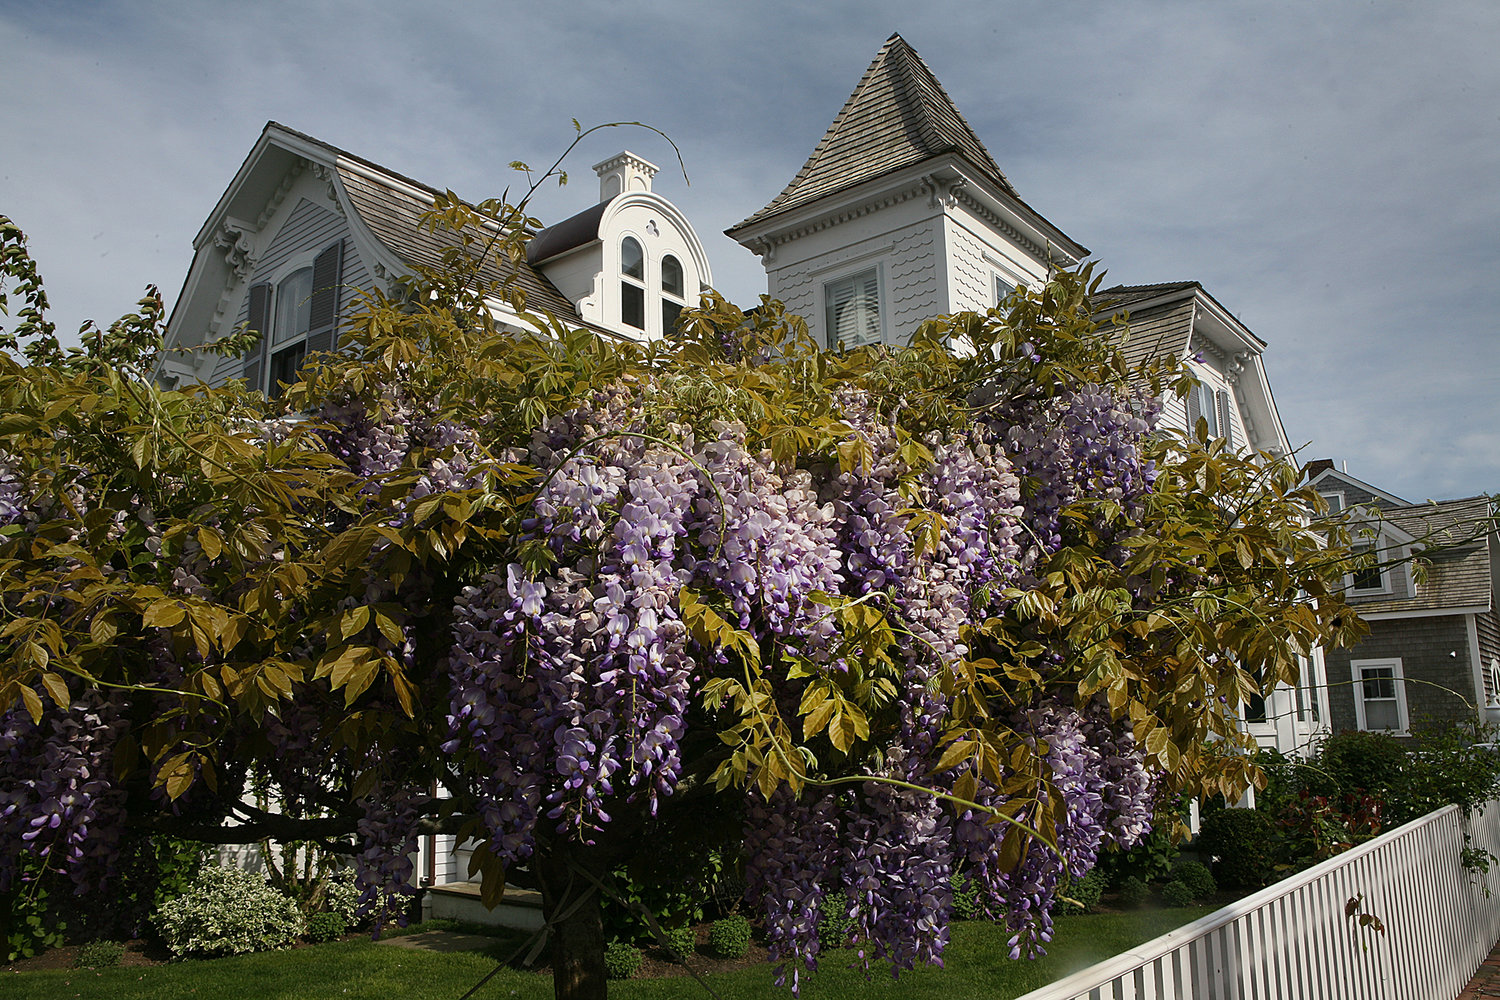 MAY 23, 2021 -- Wisteria blooms in a yard on Fair Street.